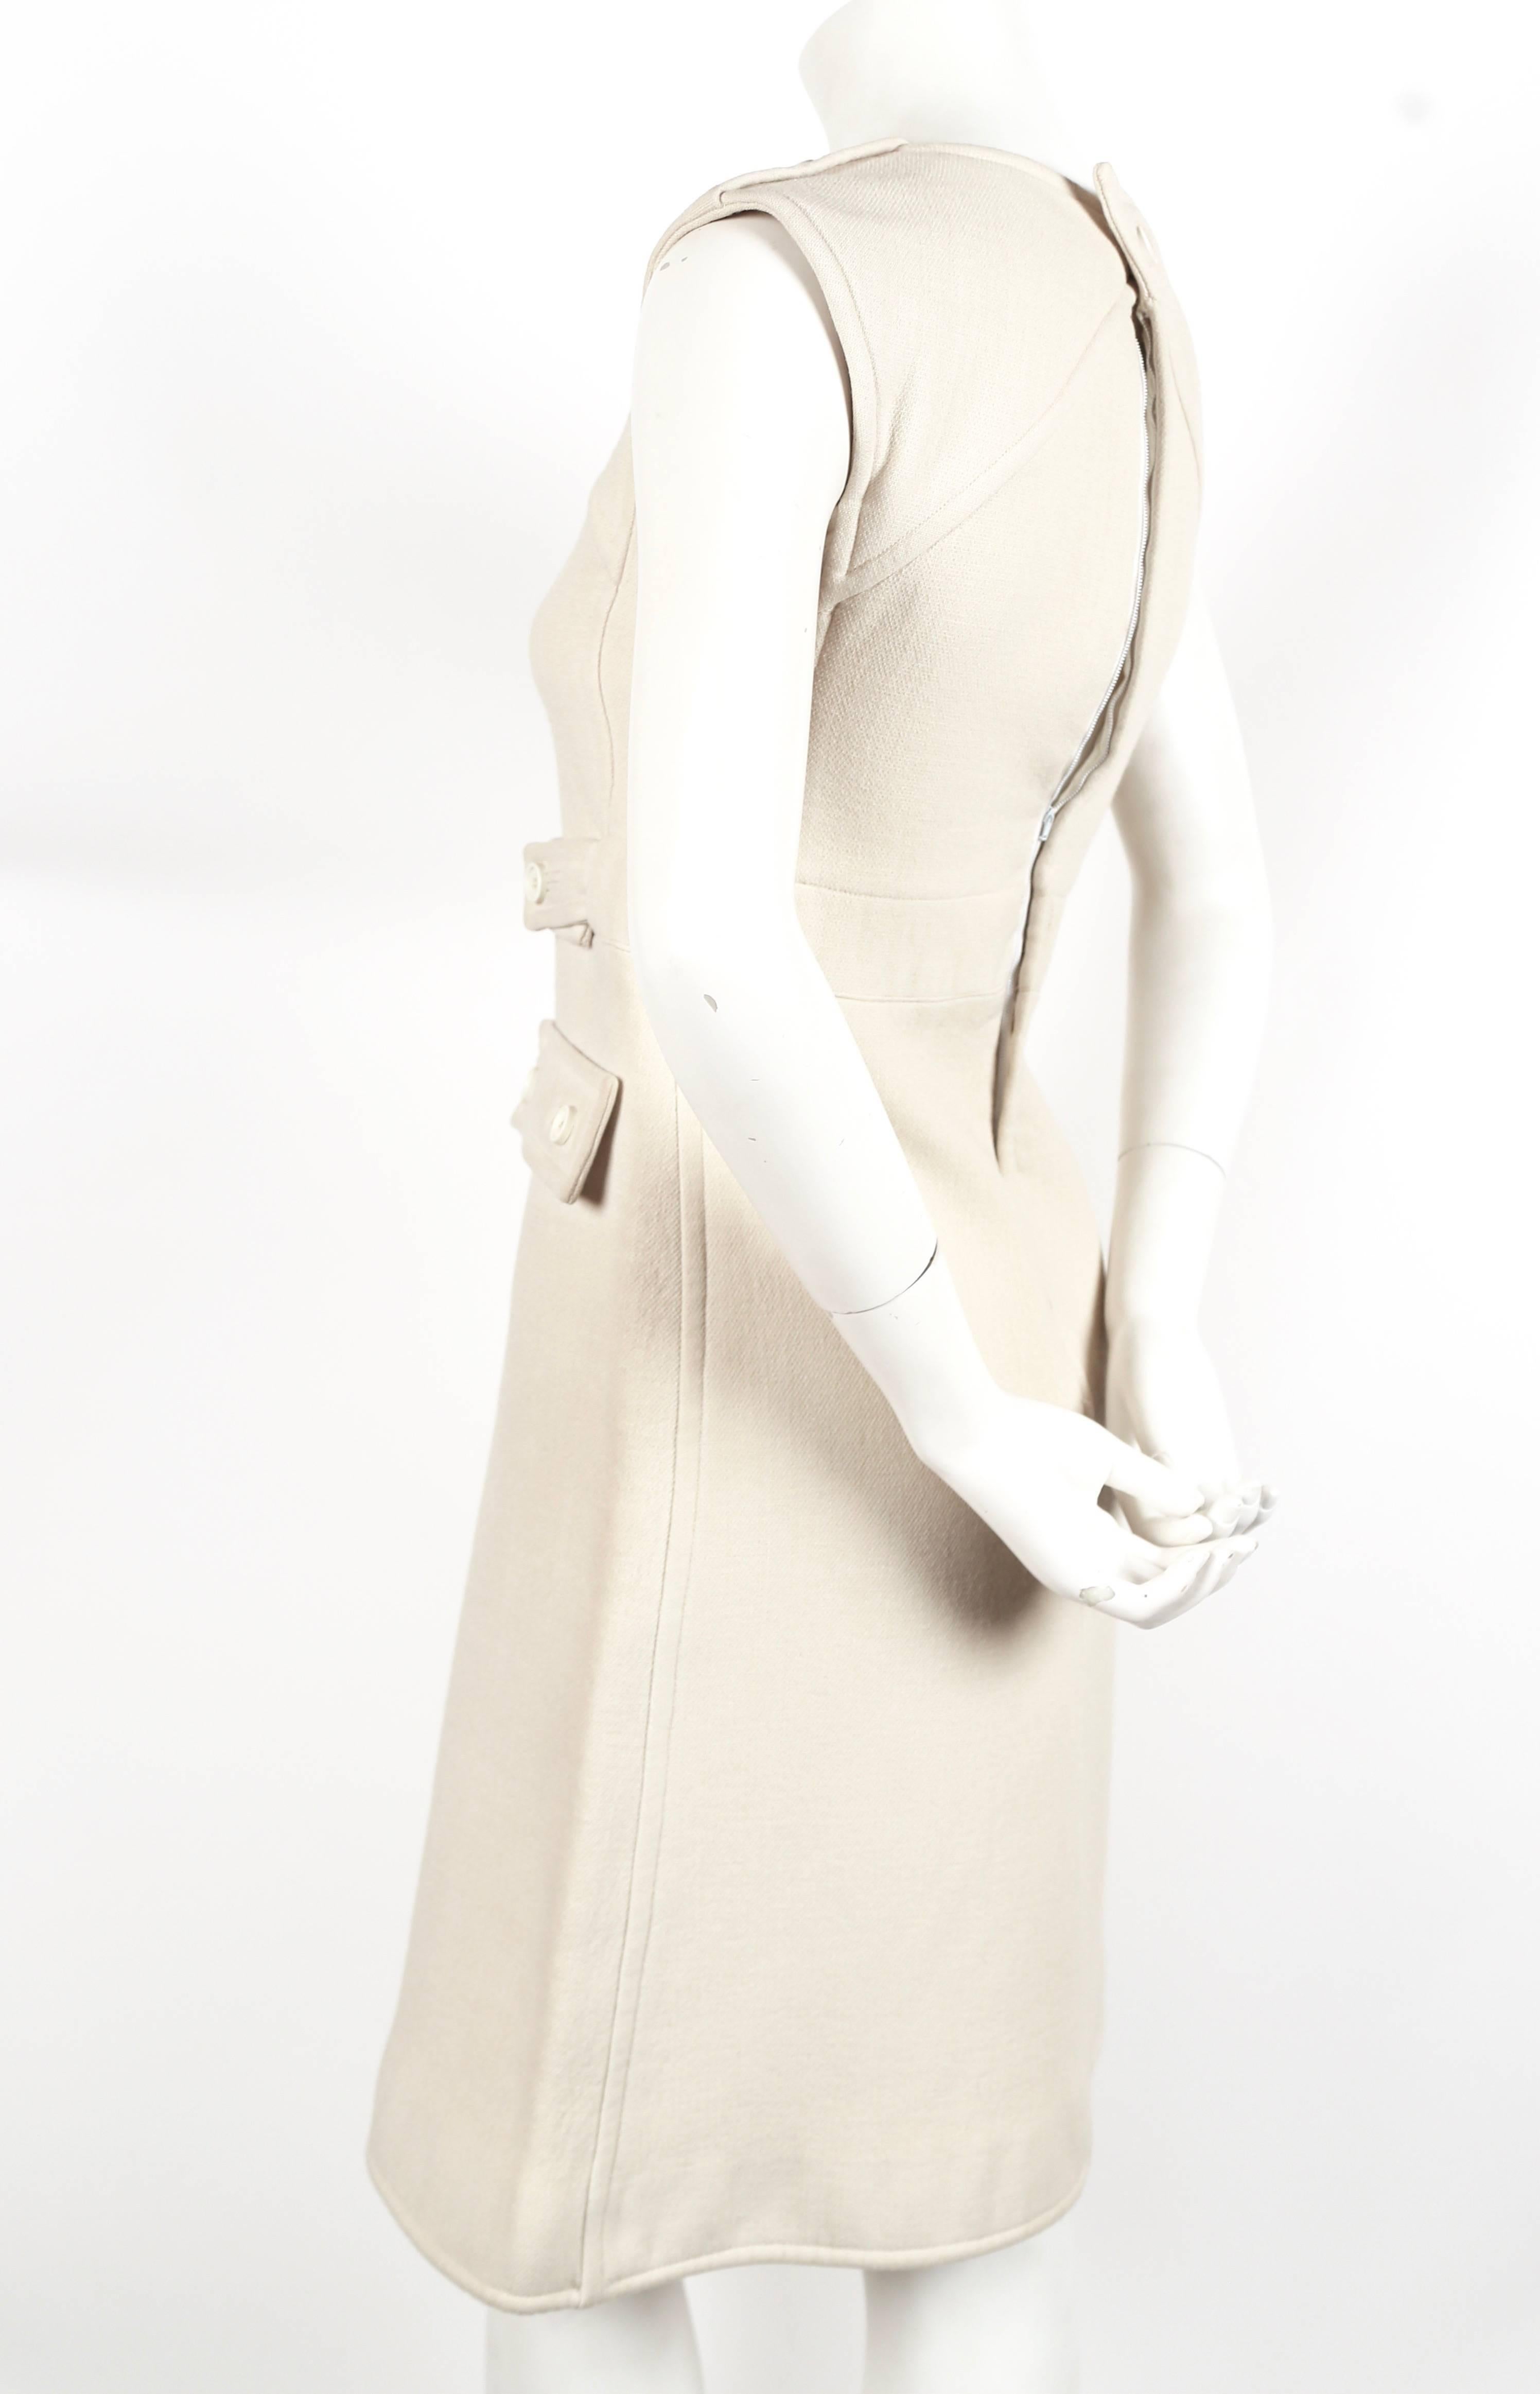 Off-white haute couture dress from Courreges dating to the 1960's. Dress best fits a size 0 or 2. Approximate measurements are as follows: bust 31-32", high waist 30", hips 36" and length is 38". Fully lined. Back closure with